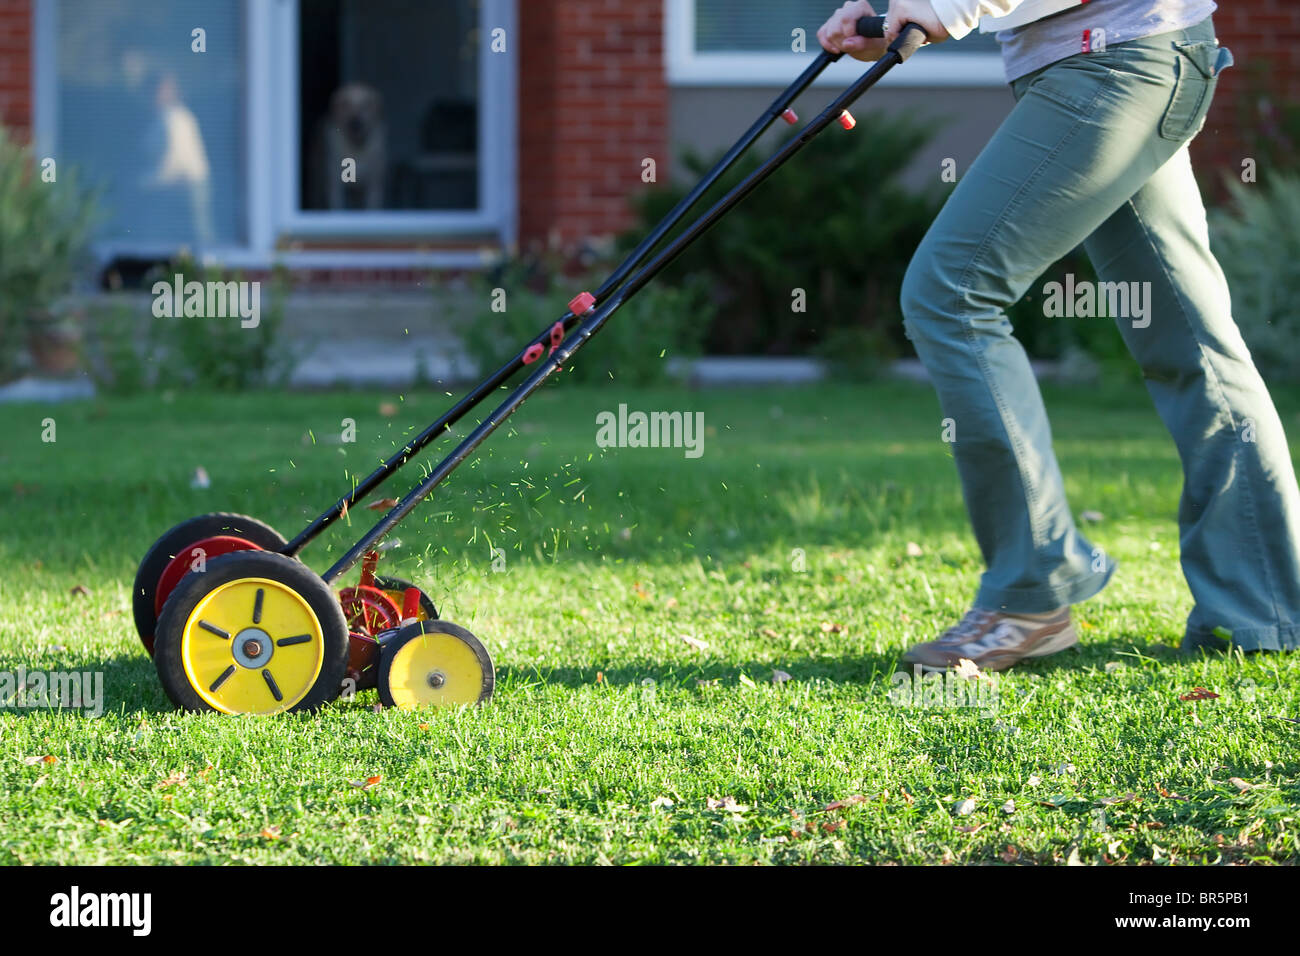 Woman cutting grass with an environmentally friendly lawn mower. Stock Photo